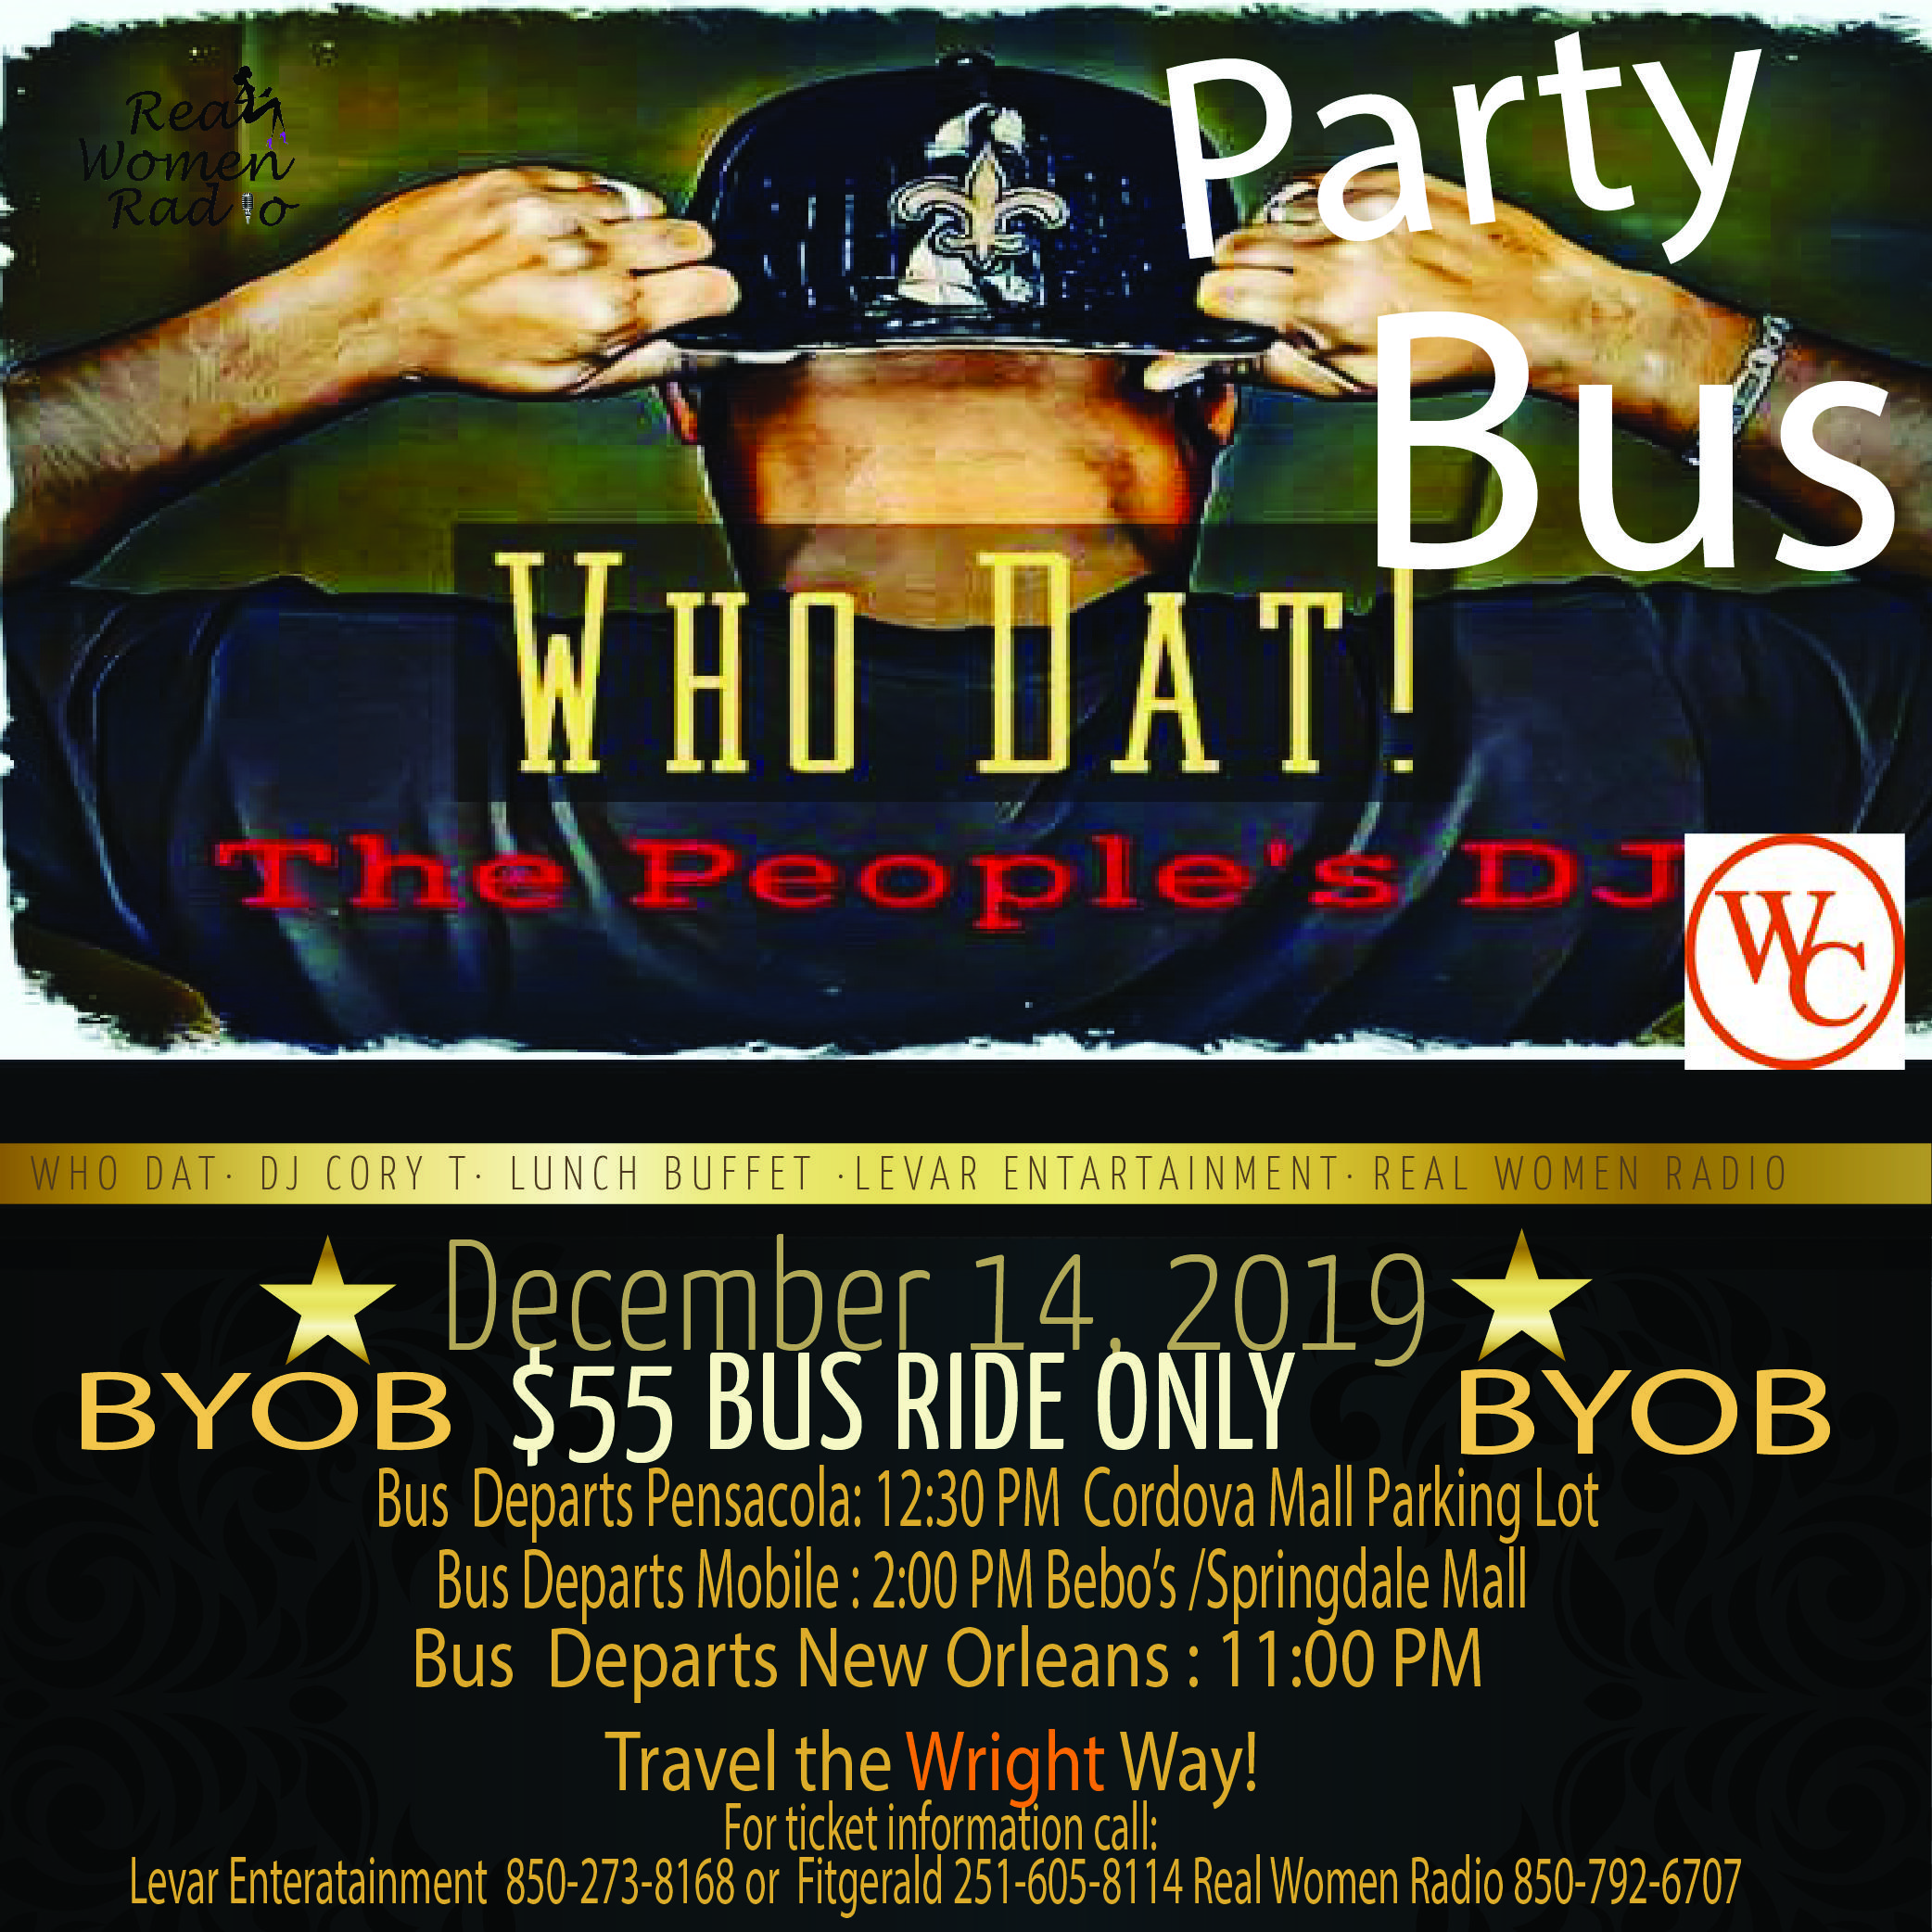 THE DJ CORY T WHO DAT PARTY BUS